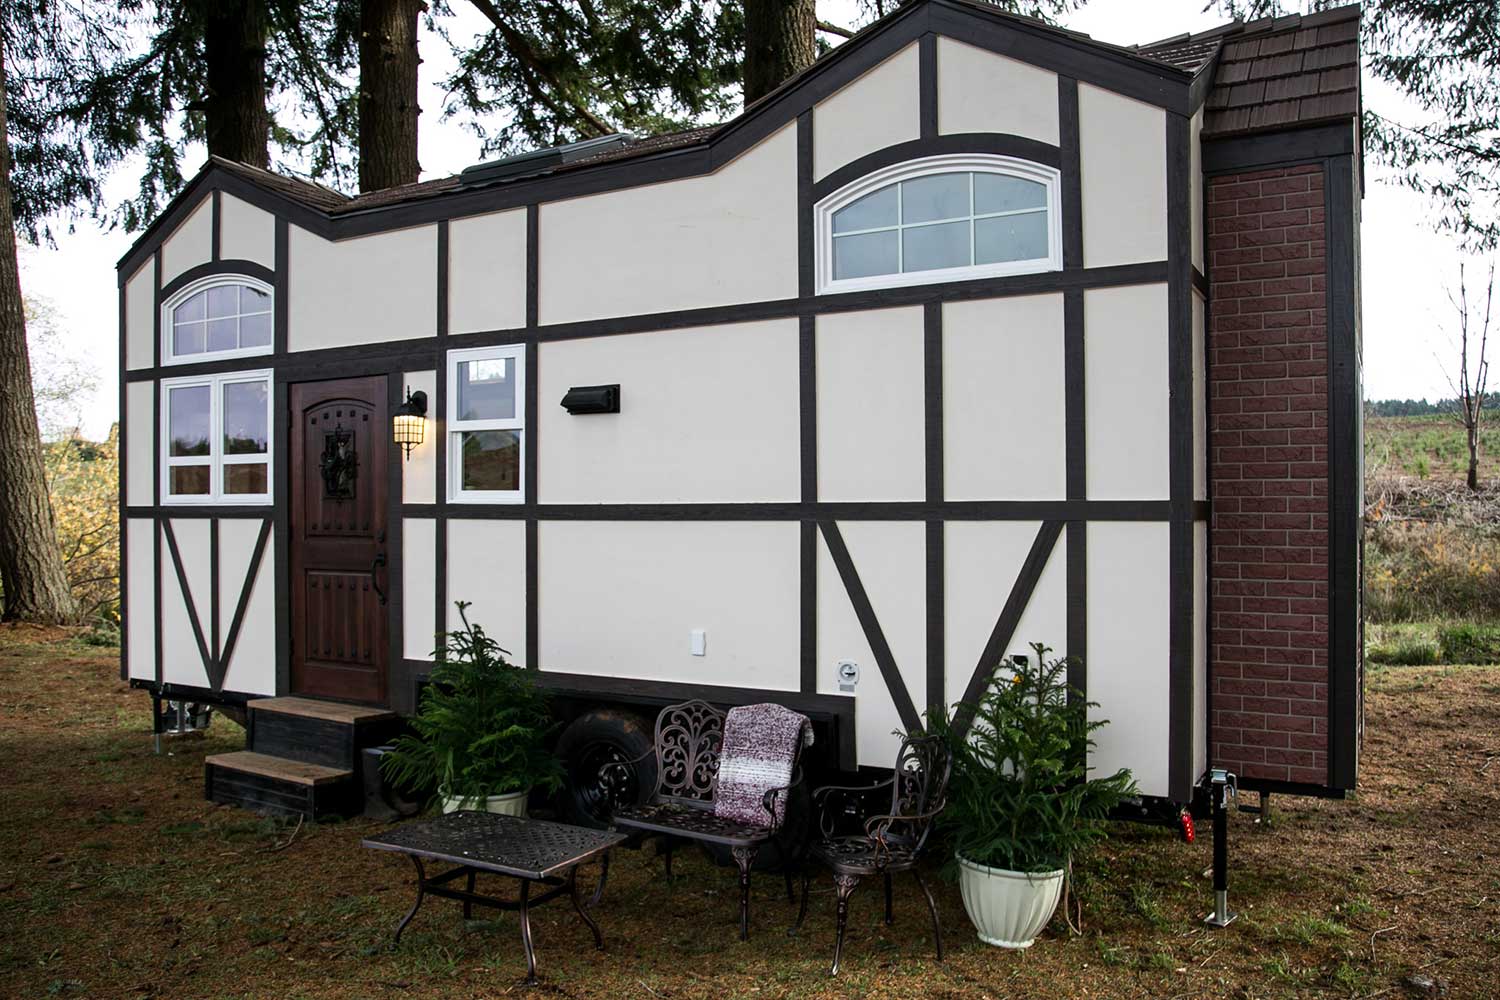 Outside view of the Tudor custom tiny house sold by Tiny Heirloom